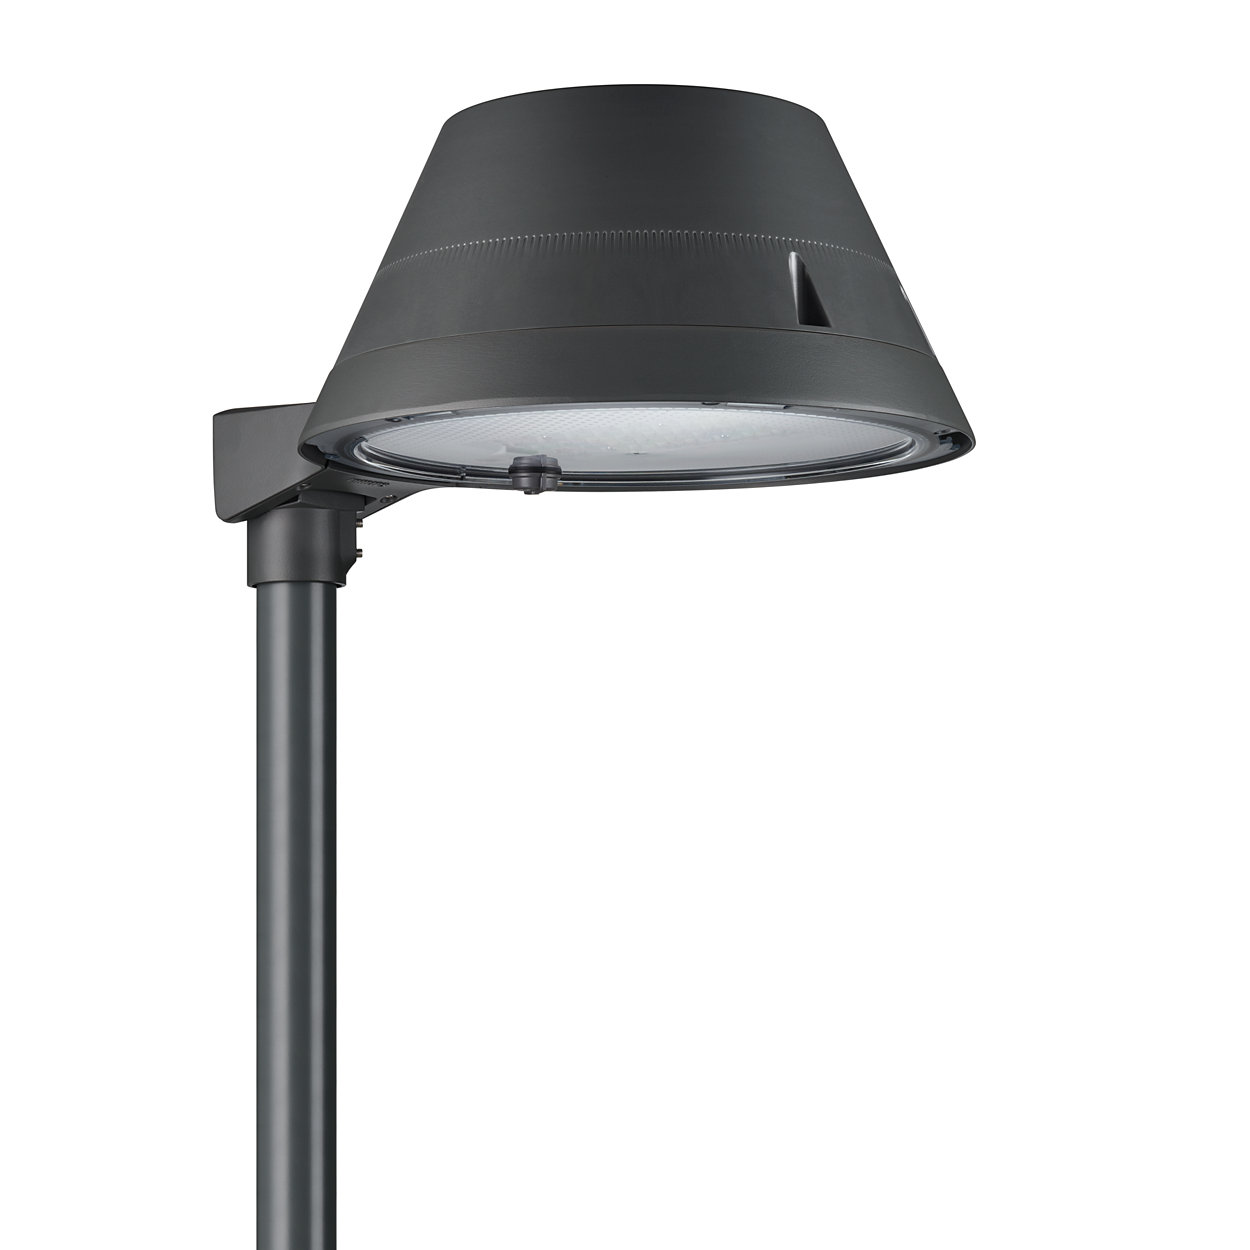 Philips TownTune Asymmetric - Extending the home feel onto the street